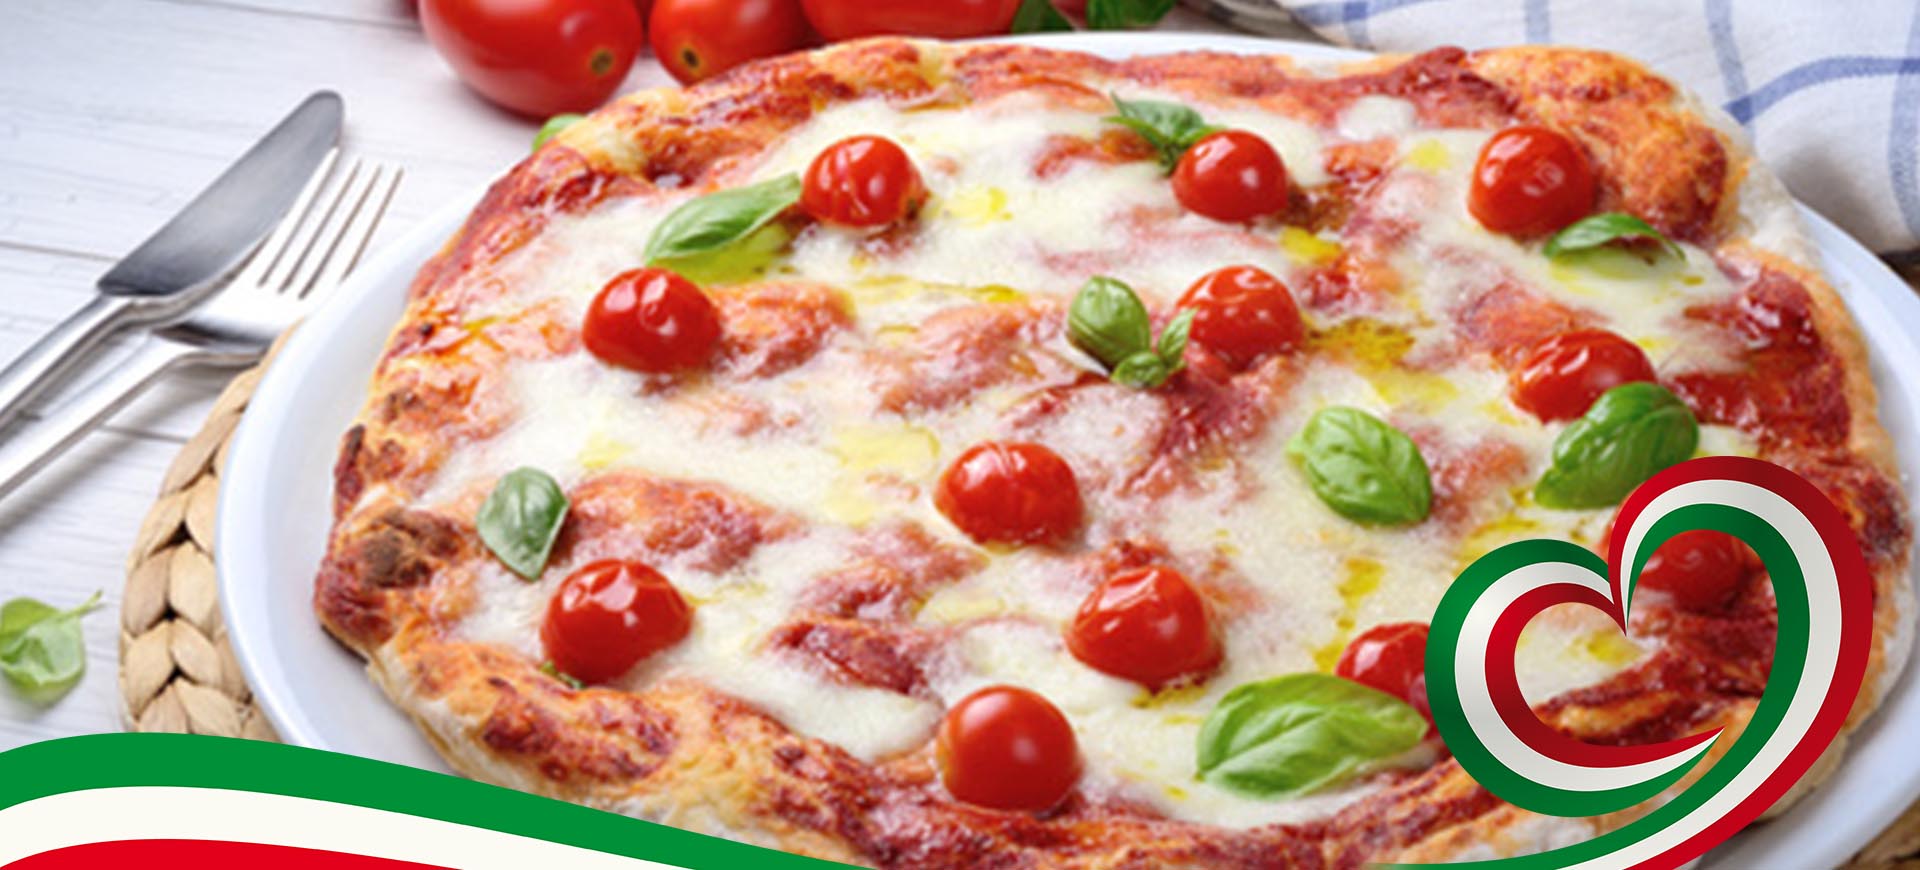 Production of classic pizza and focaccia bases as well as organic, gluten-free and vegan types.